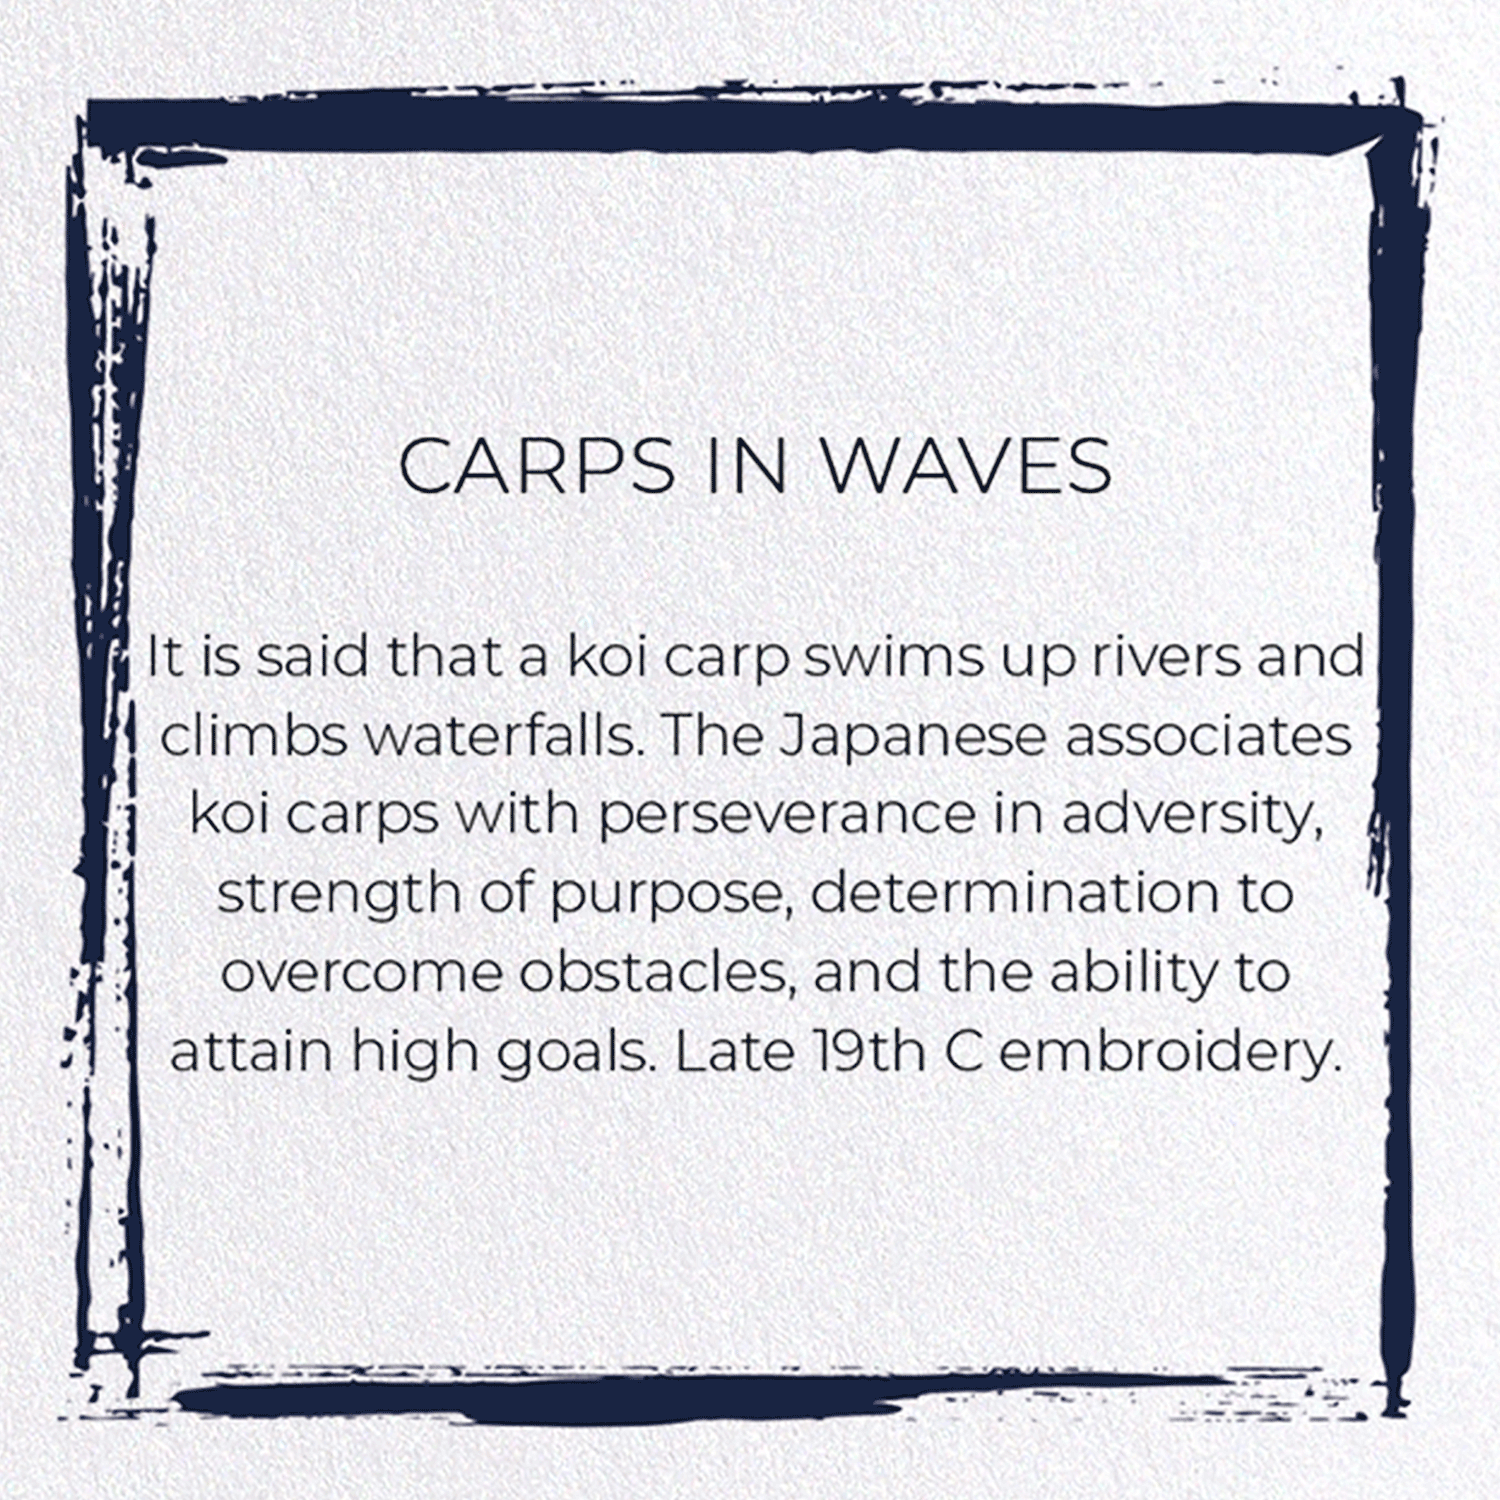 CARPS IN WAVES